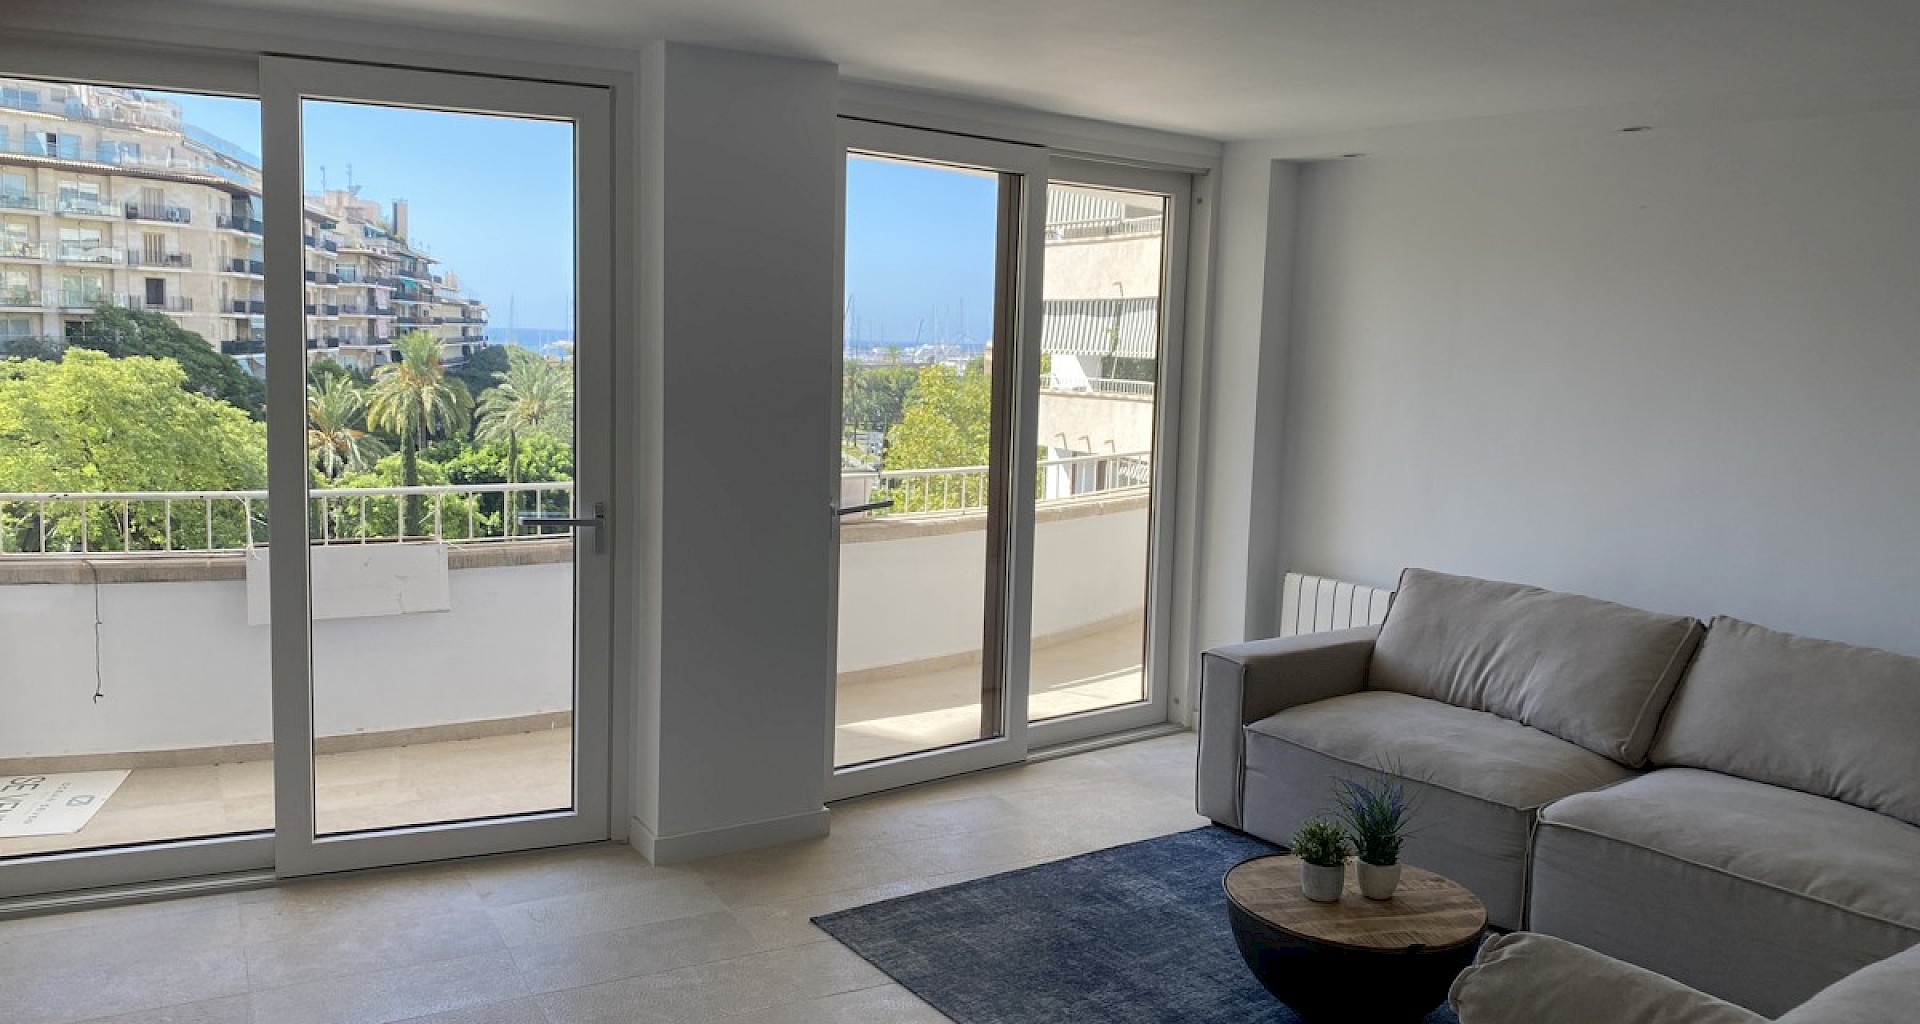 KROHN & LUEDEMANN Elegant renovated apartment in the centre of Palma with partial sea views IMG_0516